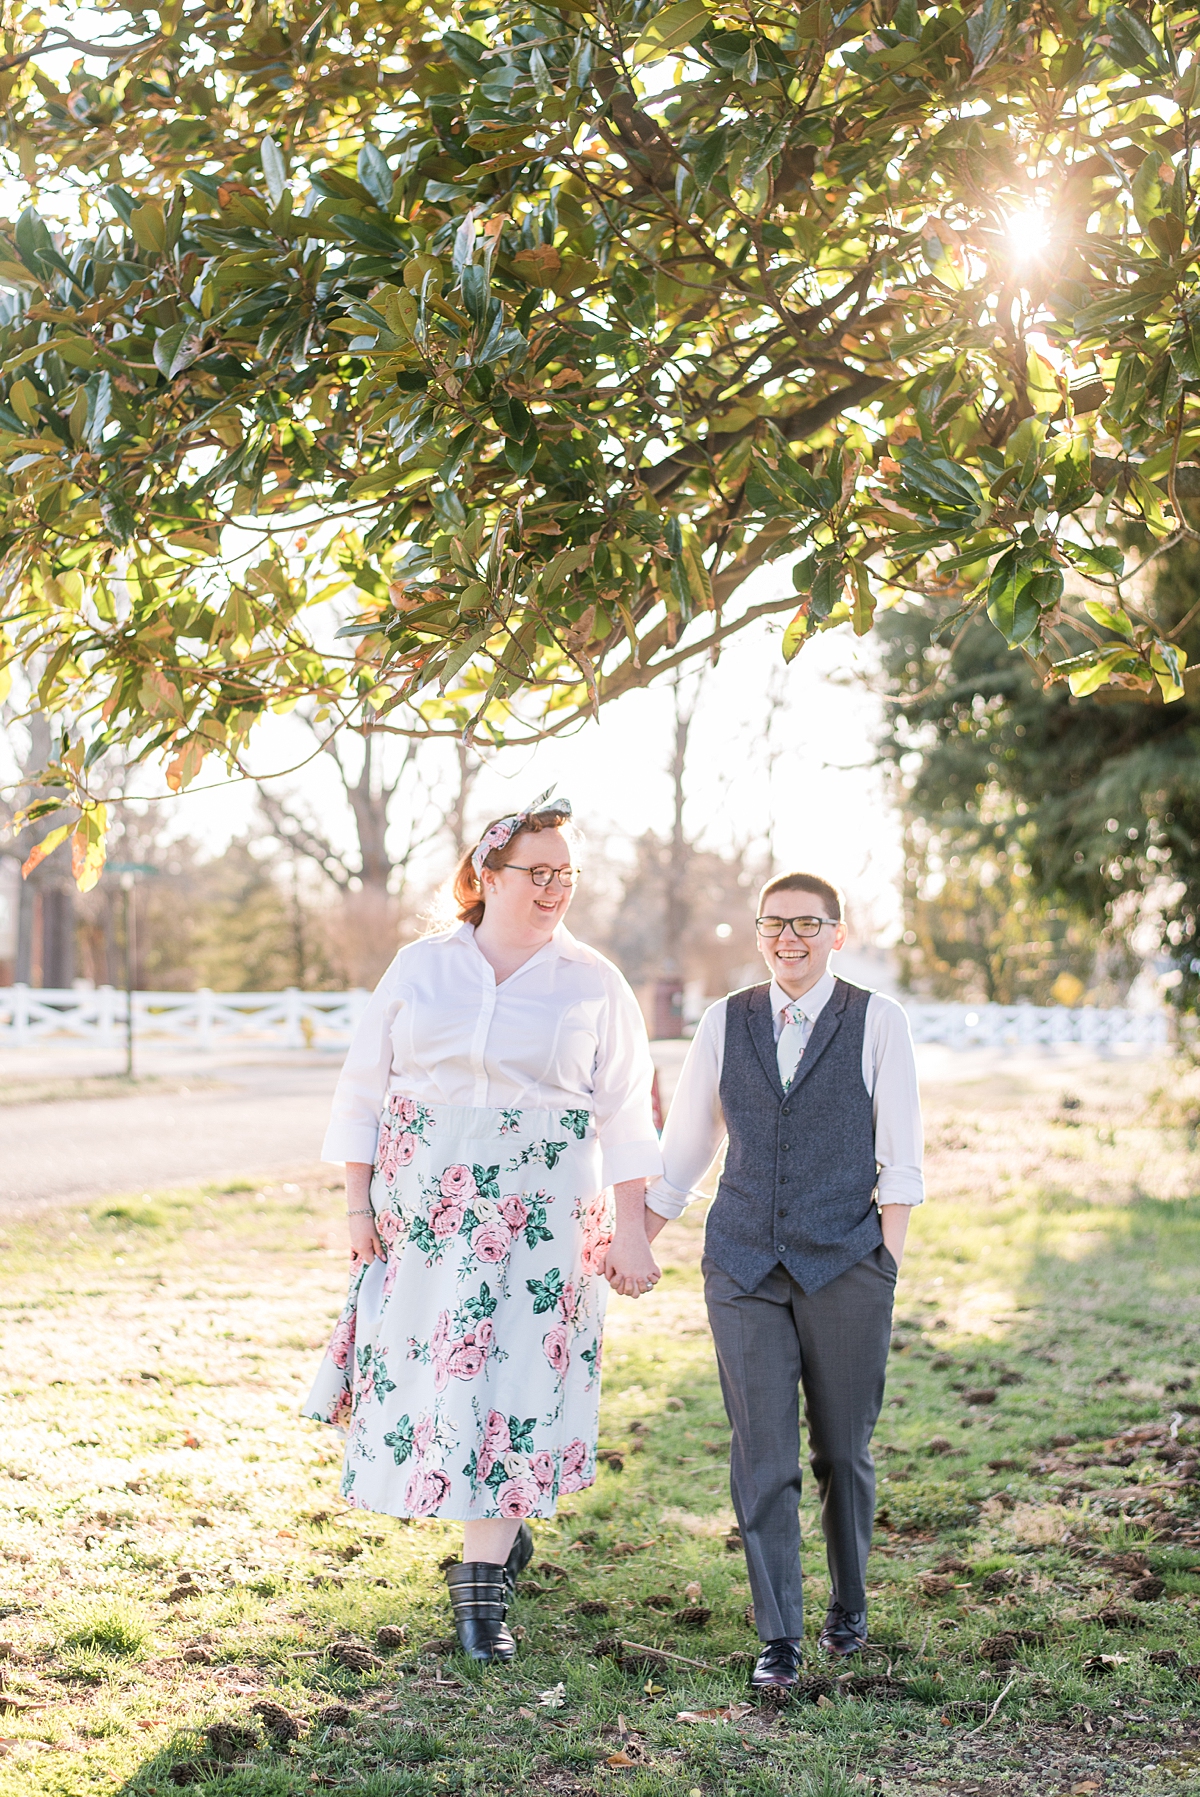 1950's Styled Engagement Session in Virginia Beach by Richmond Wedding Photographer, Kailey Brianne Photography. 